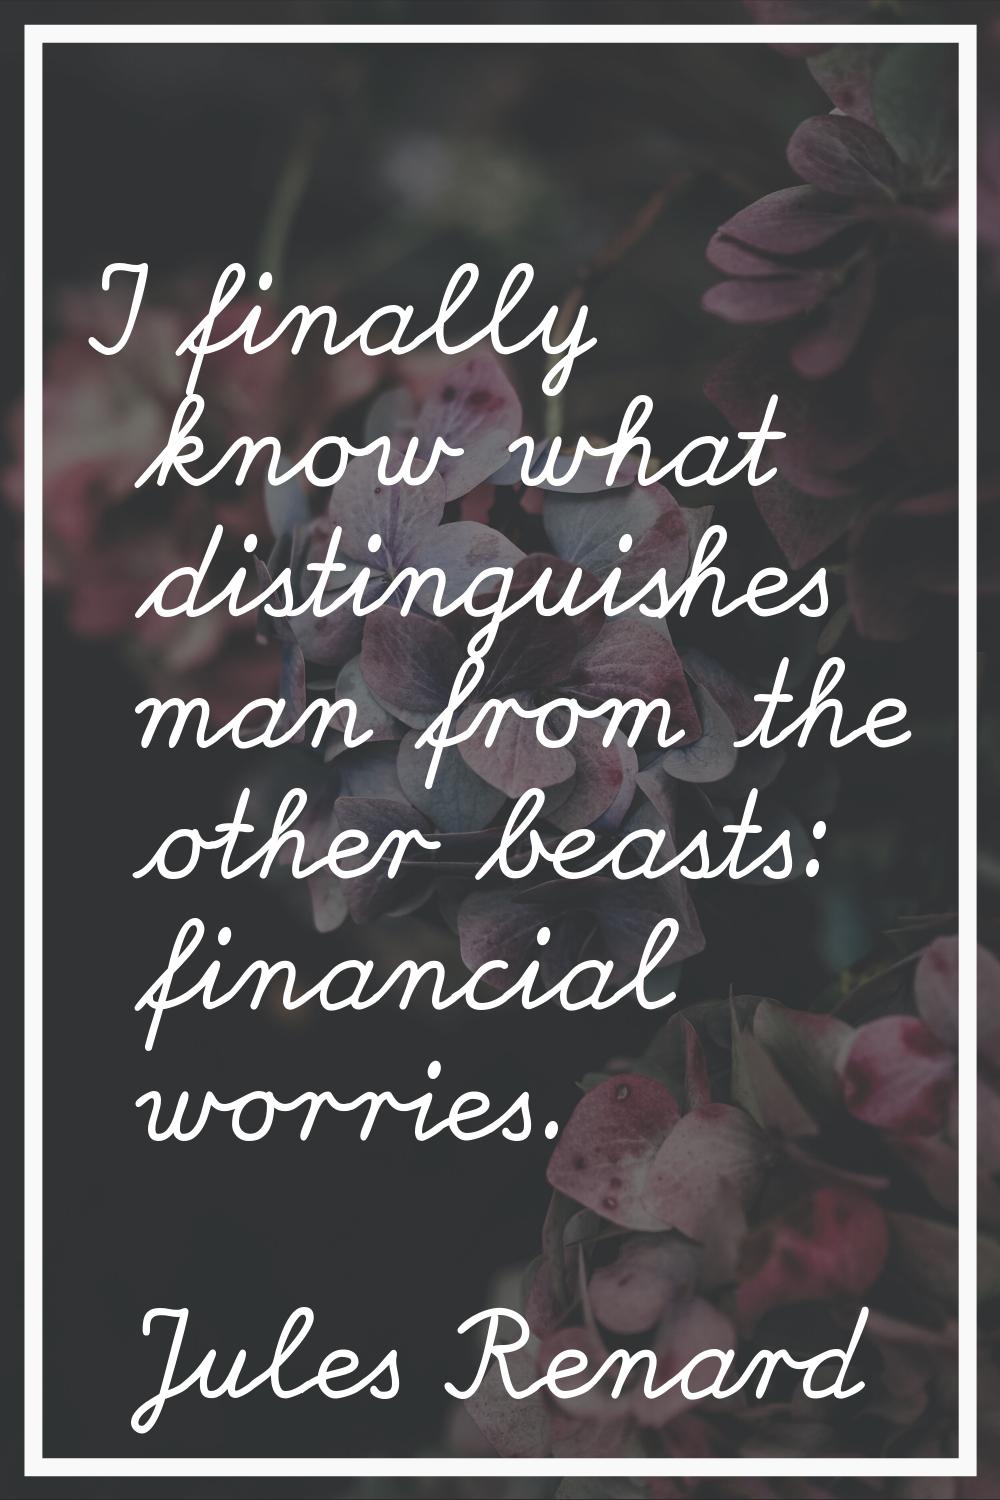 I finally know what distinguishes man from the other beasts: financial worries.